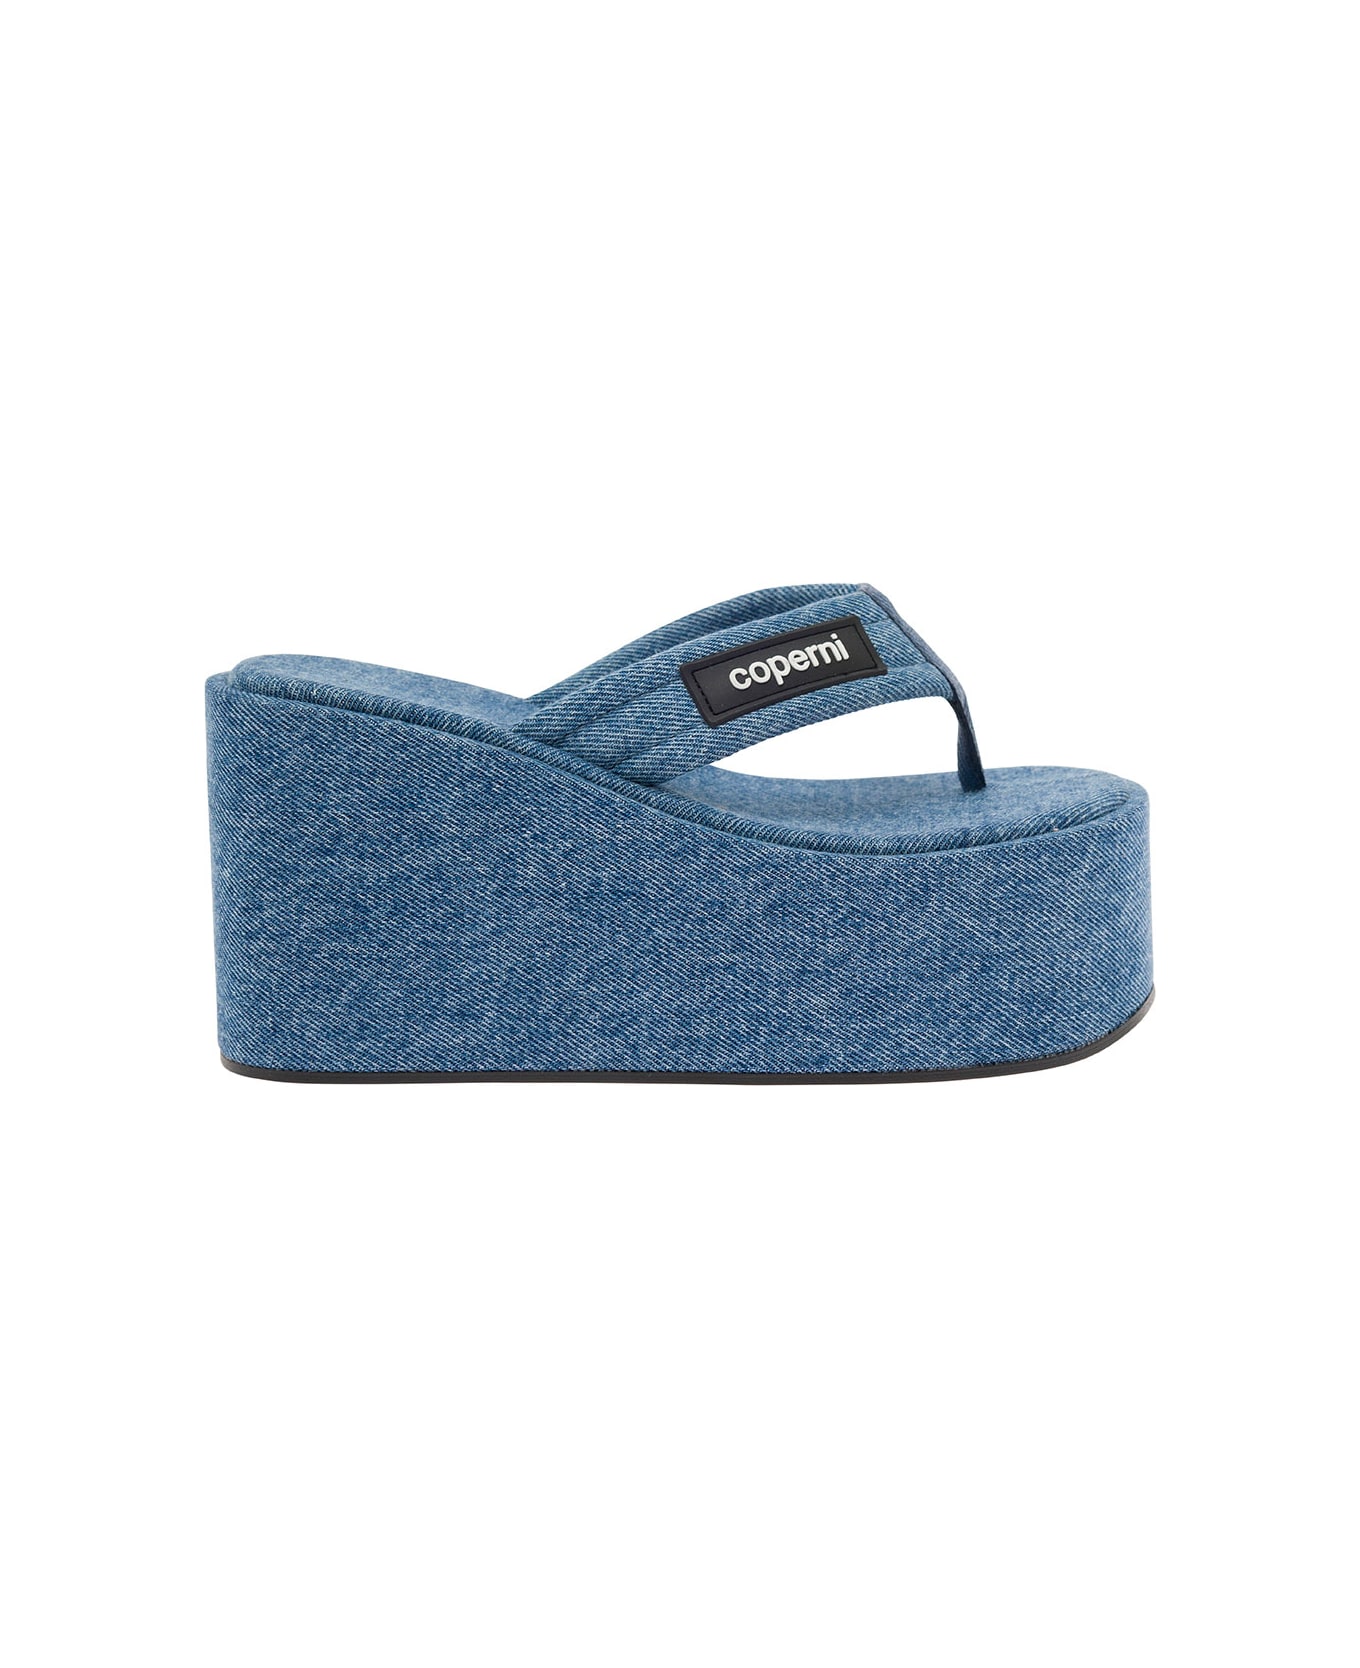 Coperni Light Blue Sandals With Wedge And Logo Patch In Denim Woman - Blu サンダル